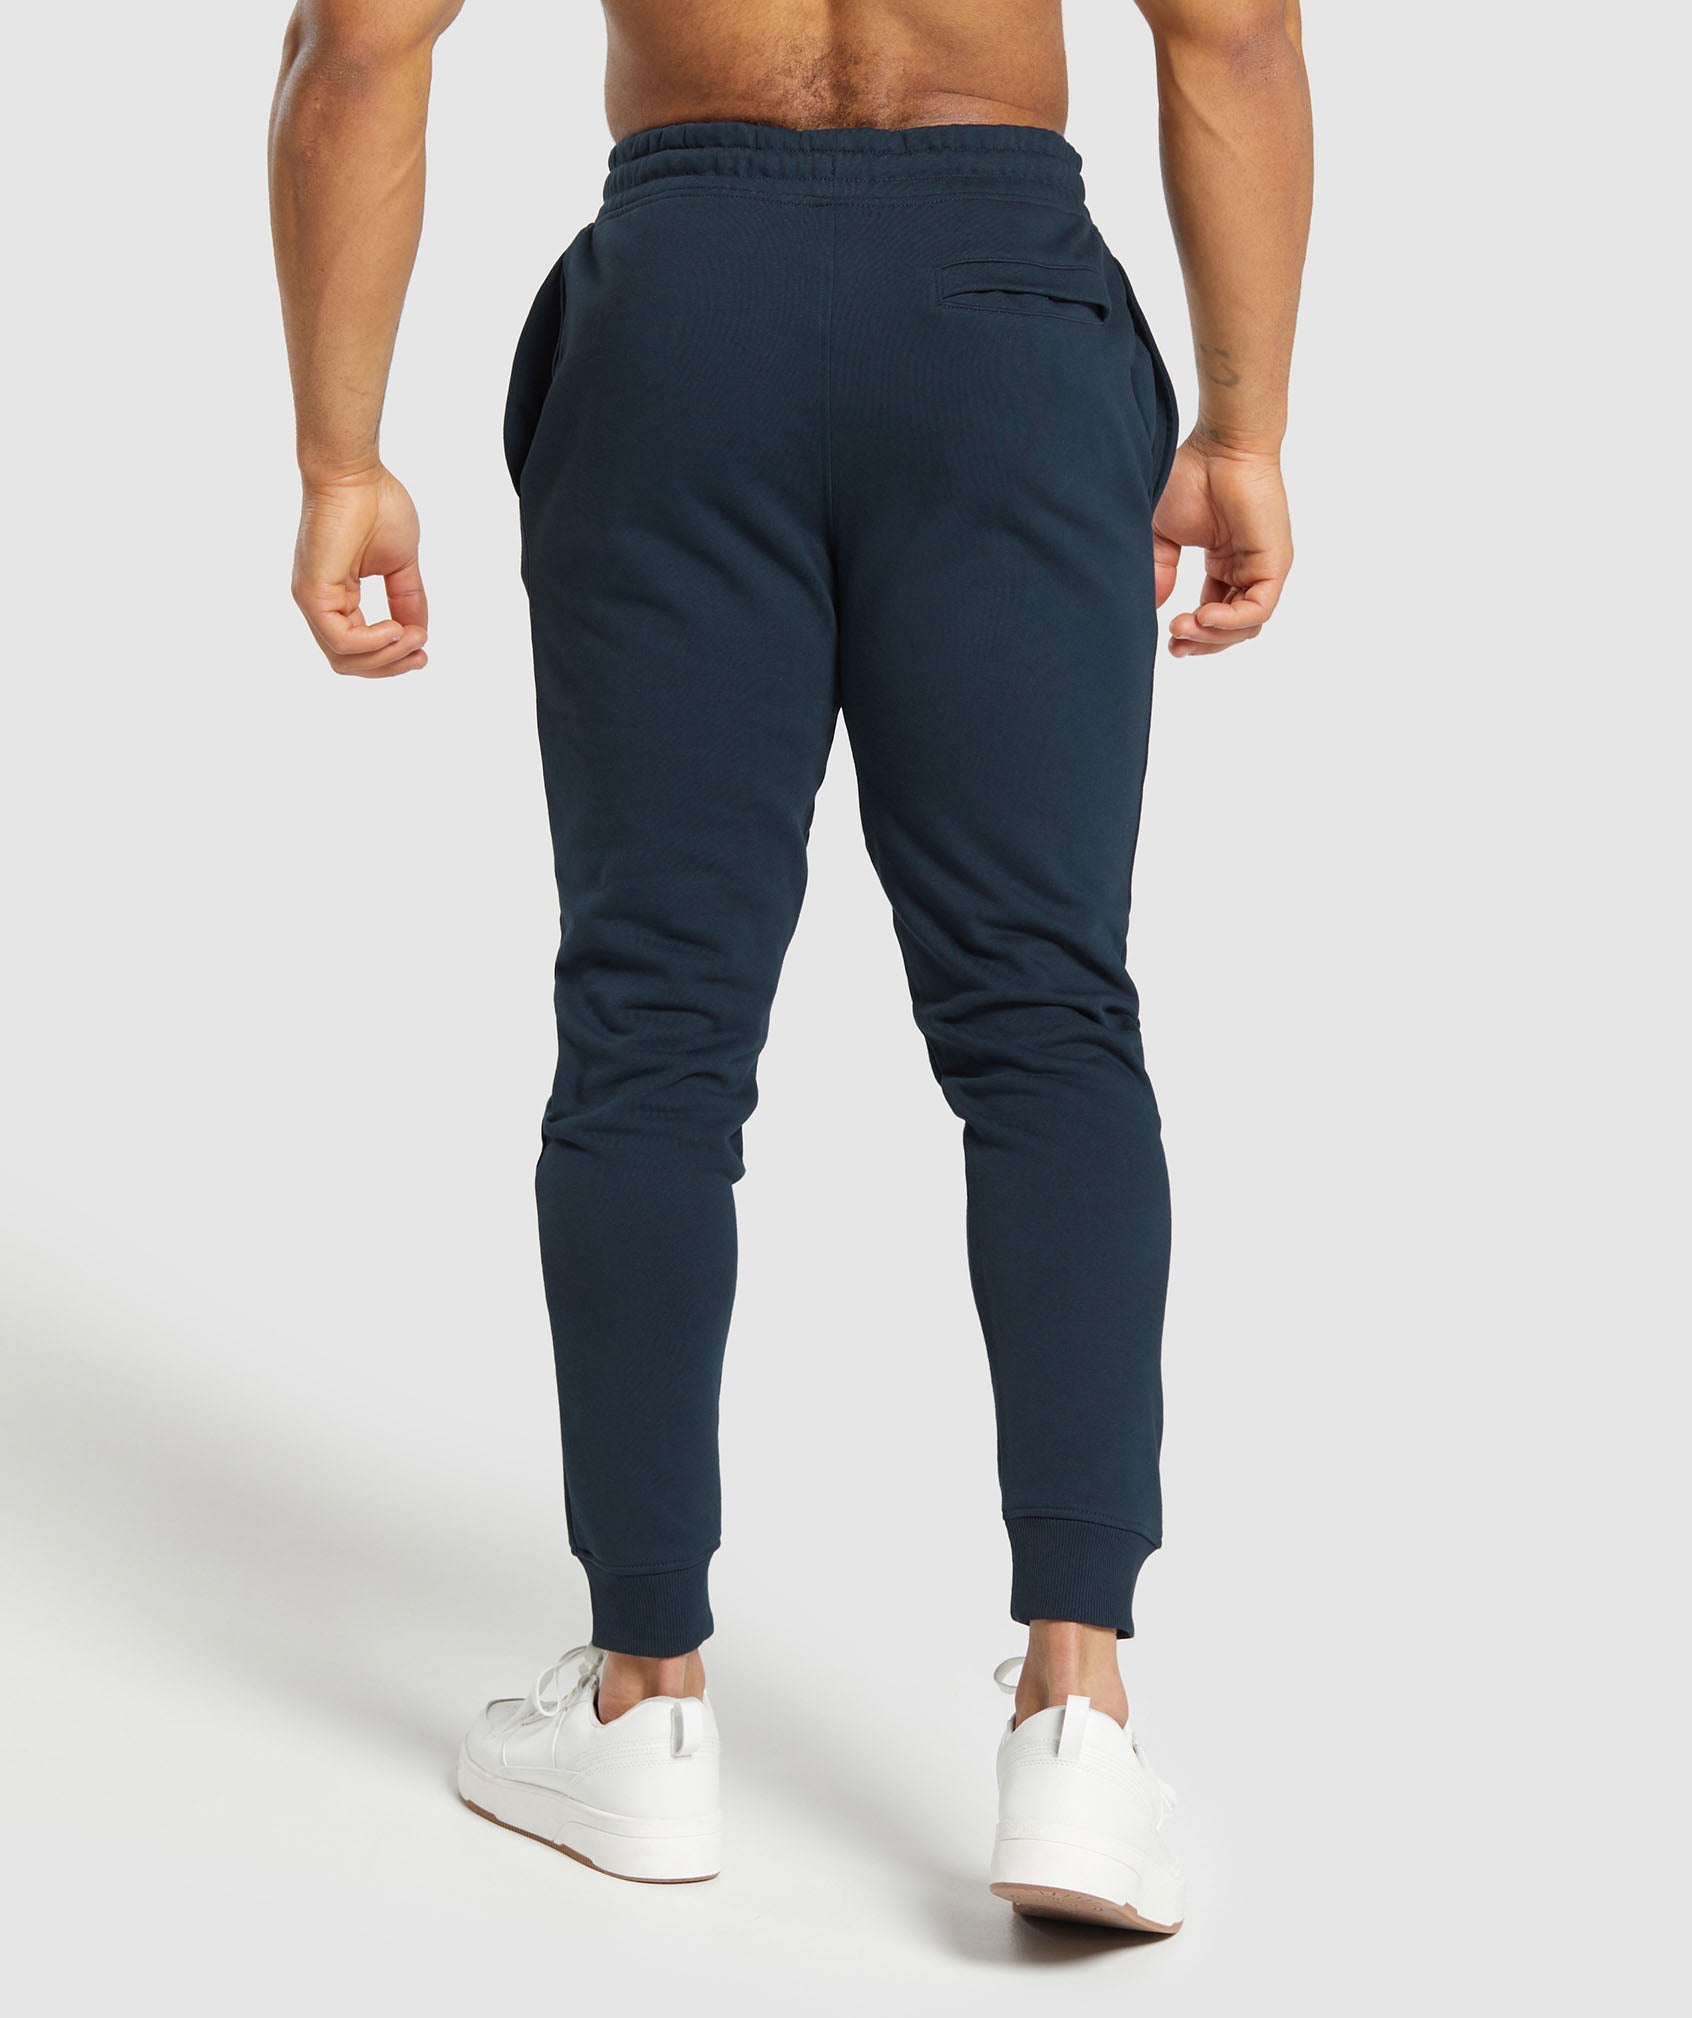 Crest Joggers in Navy - view 2